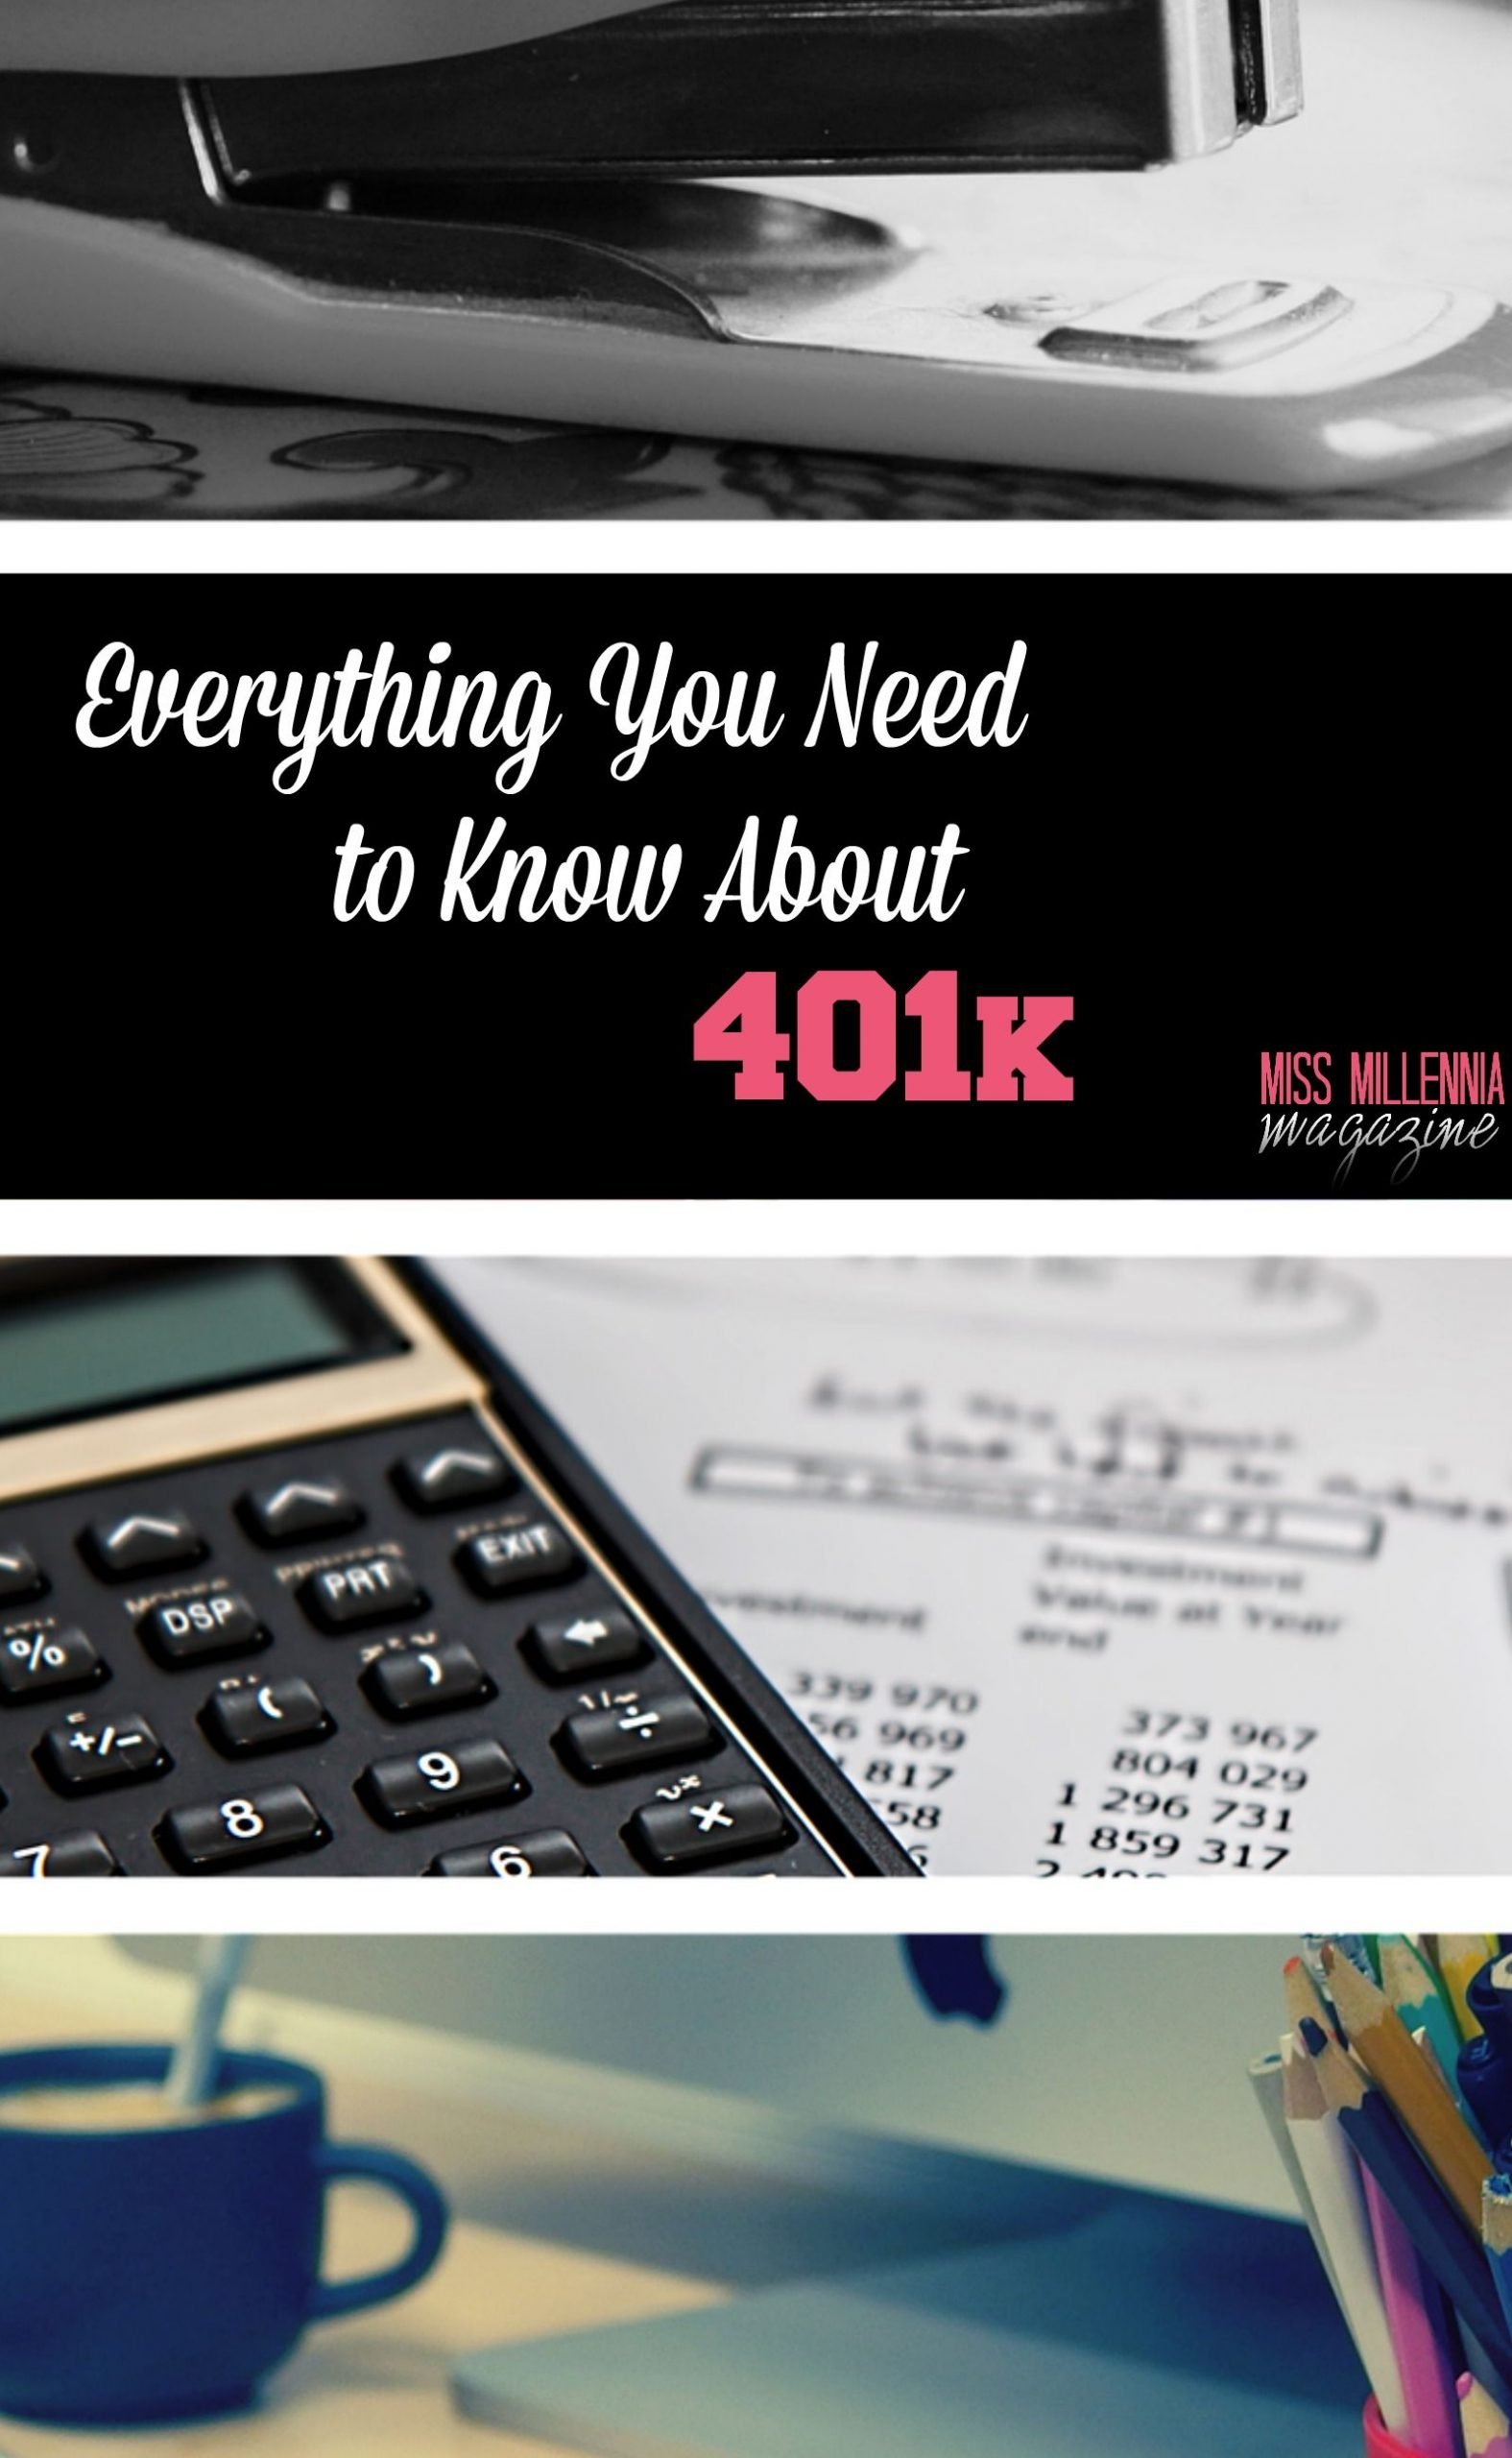 Everything You Need to Know About 401k